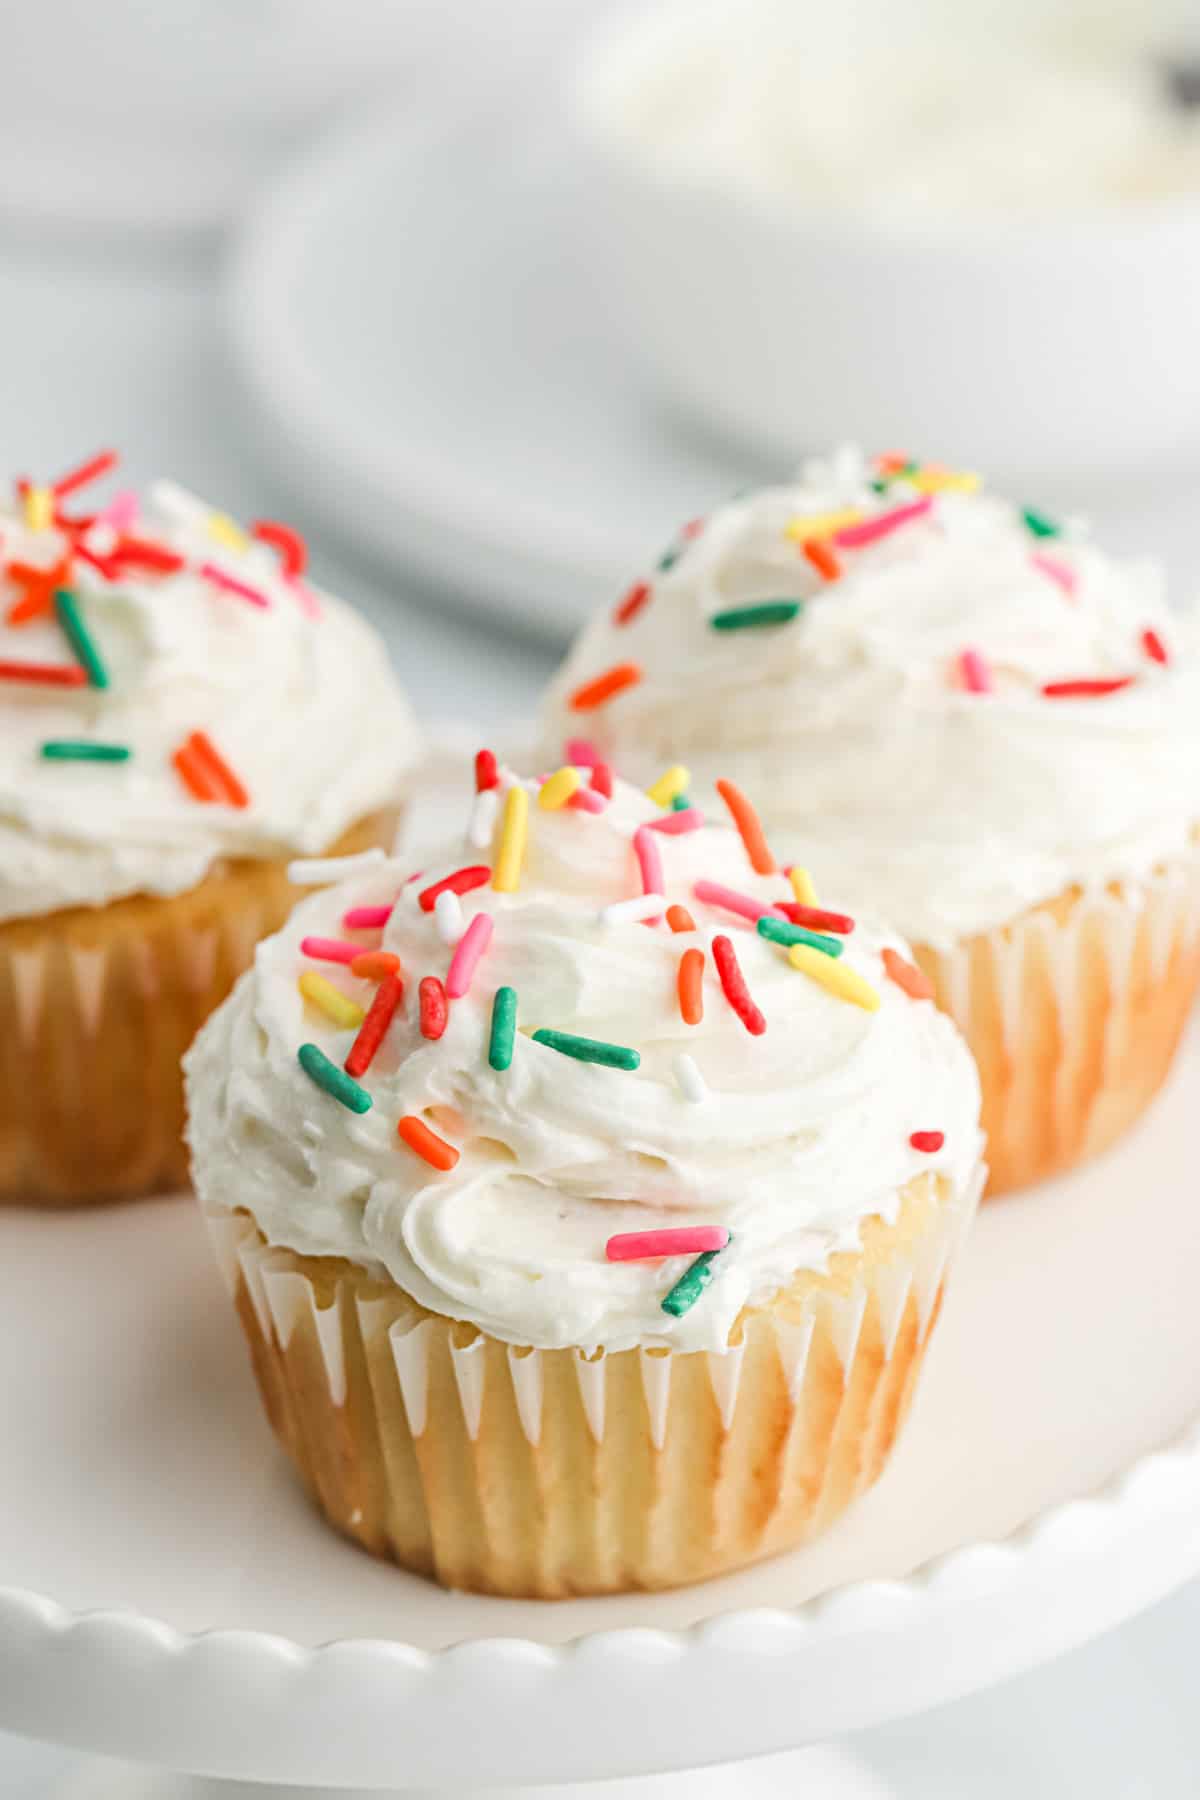 Cupcakes topped with American buttercream and sprinkles on the table.